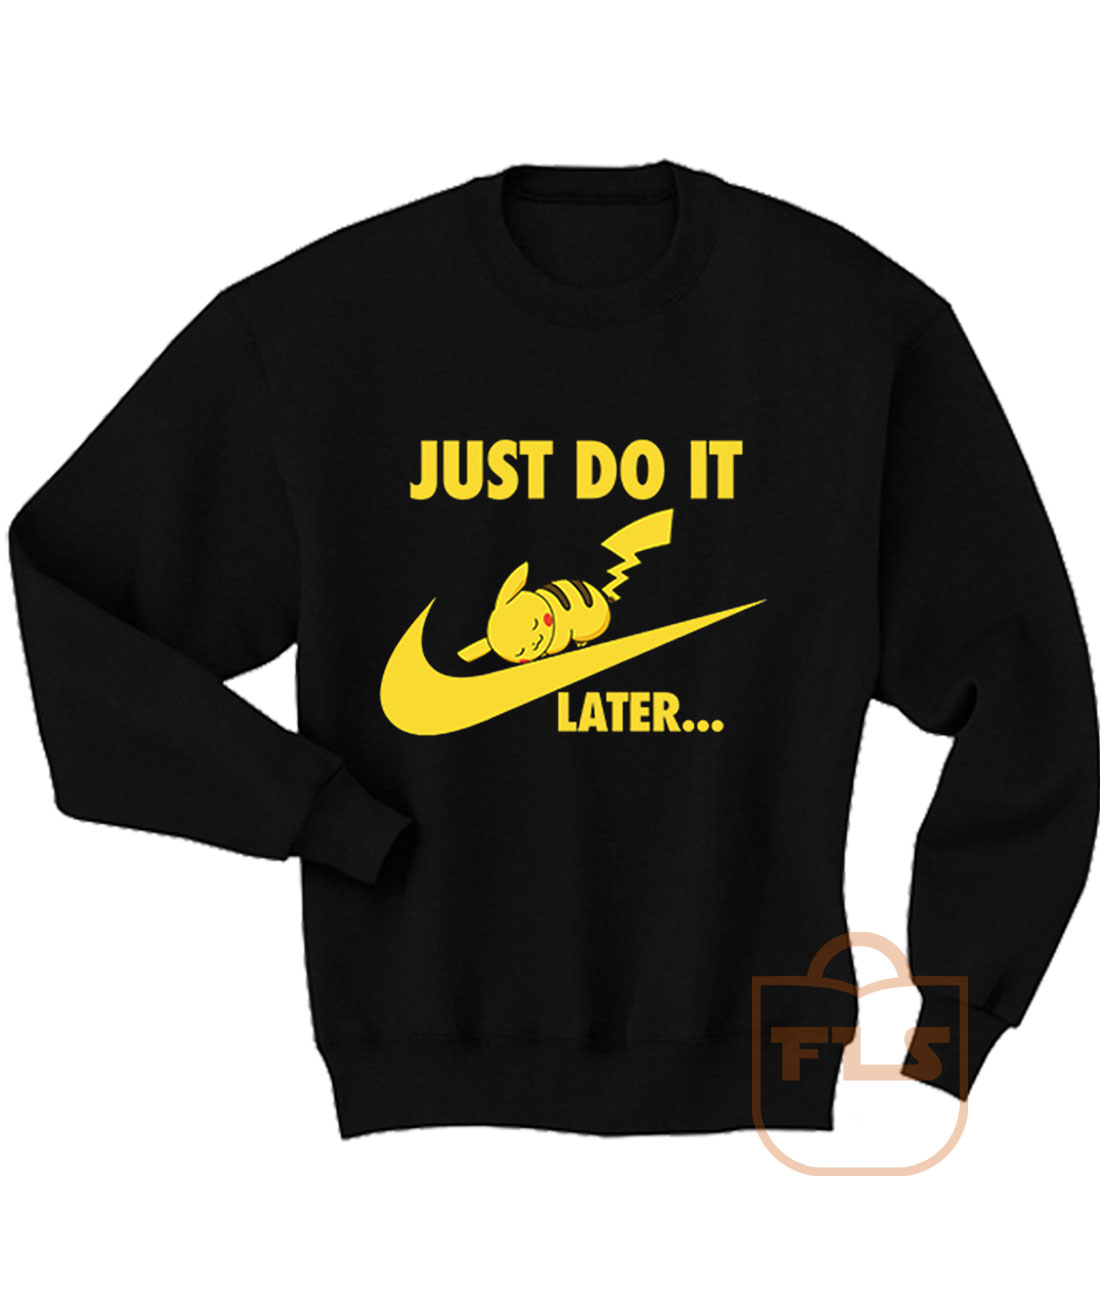 just do it later hoodie